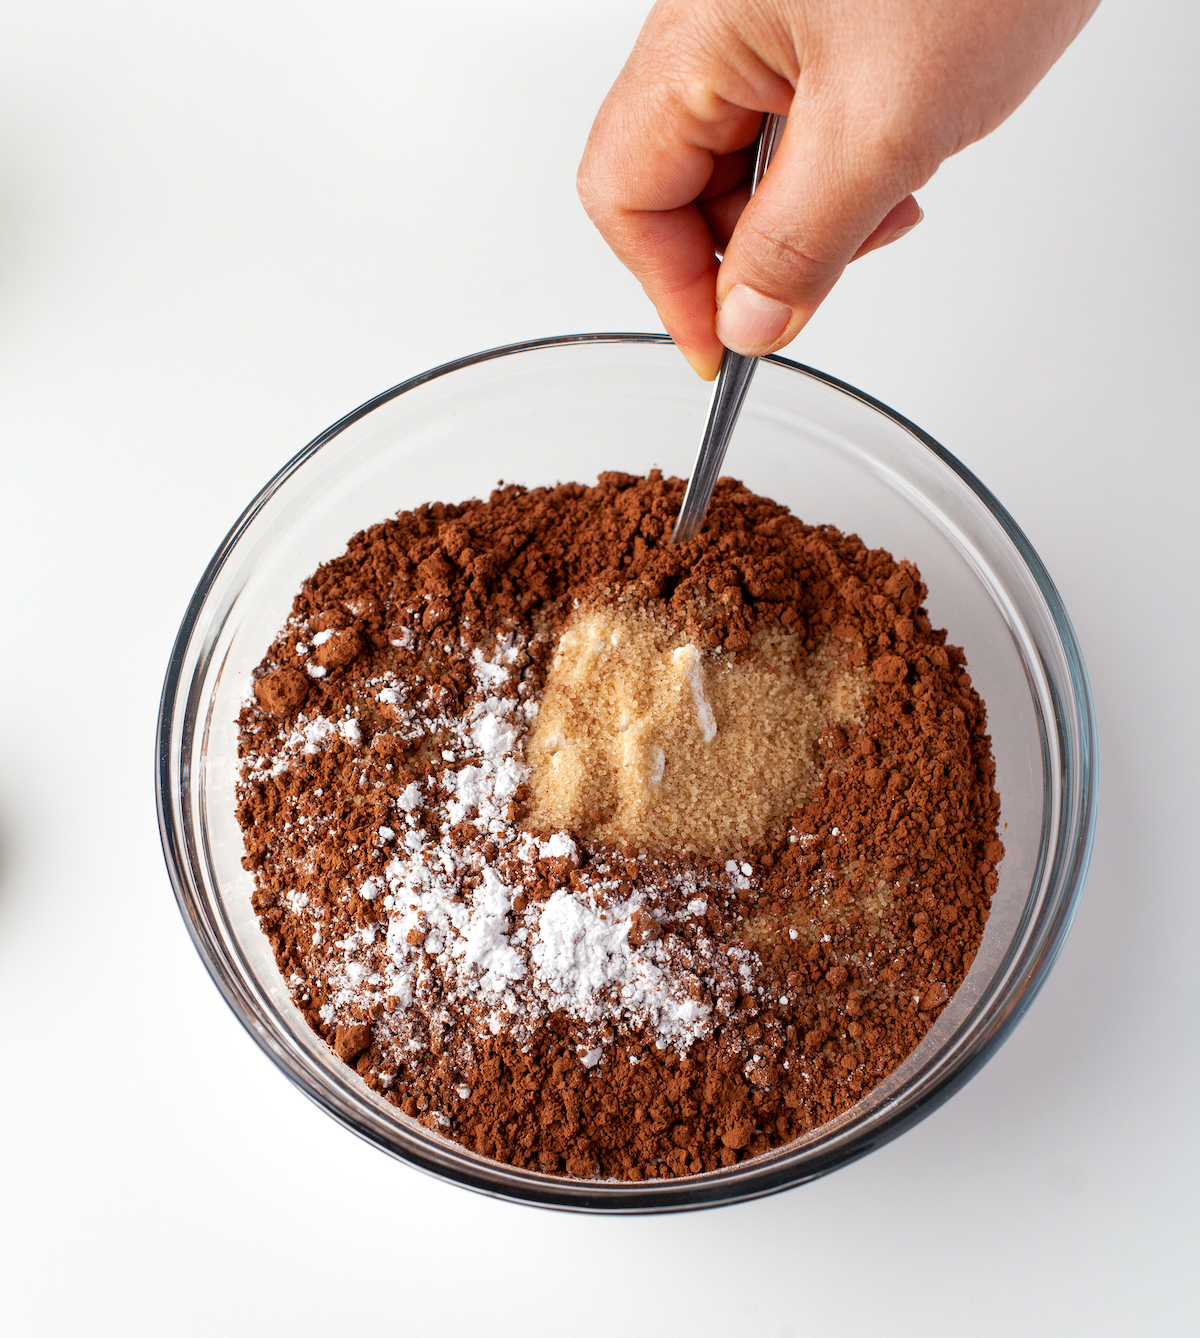 Whisk together brown sugar, cocoa powder, baking powder, and flour